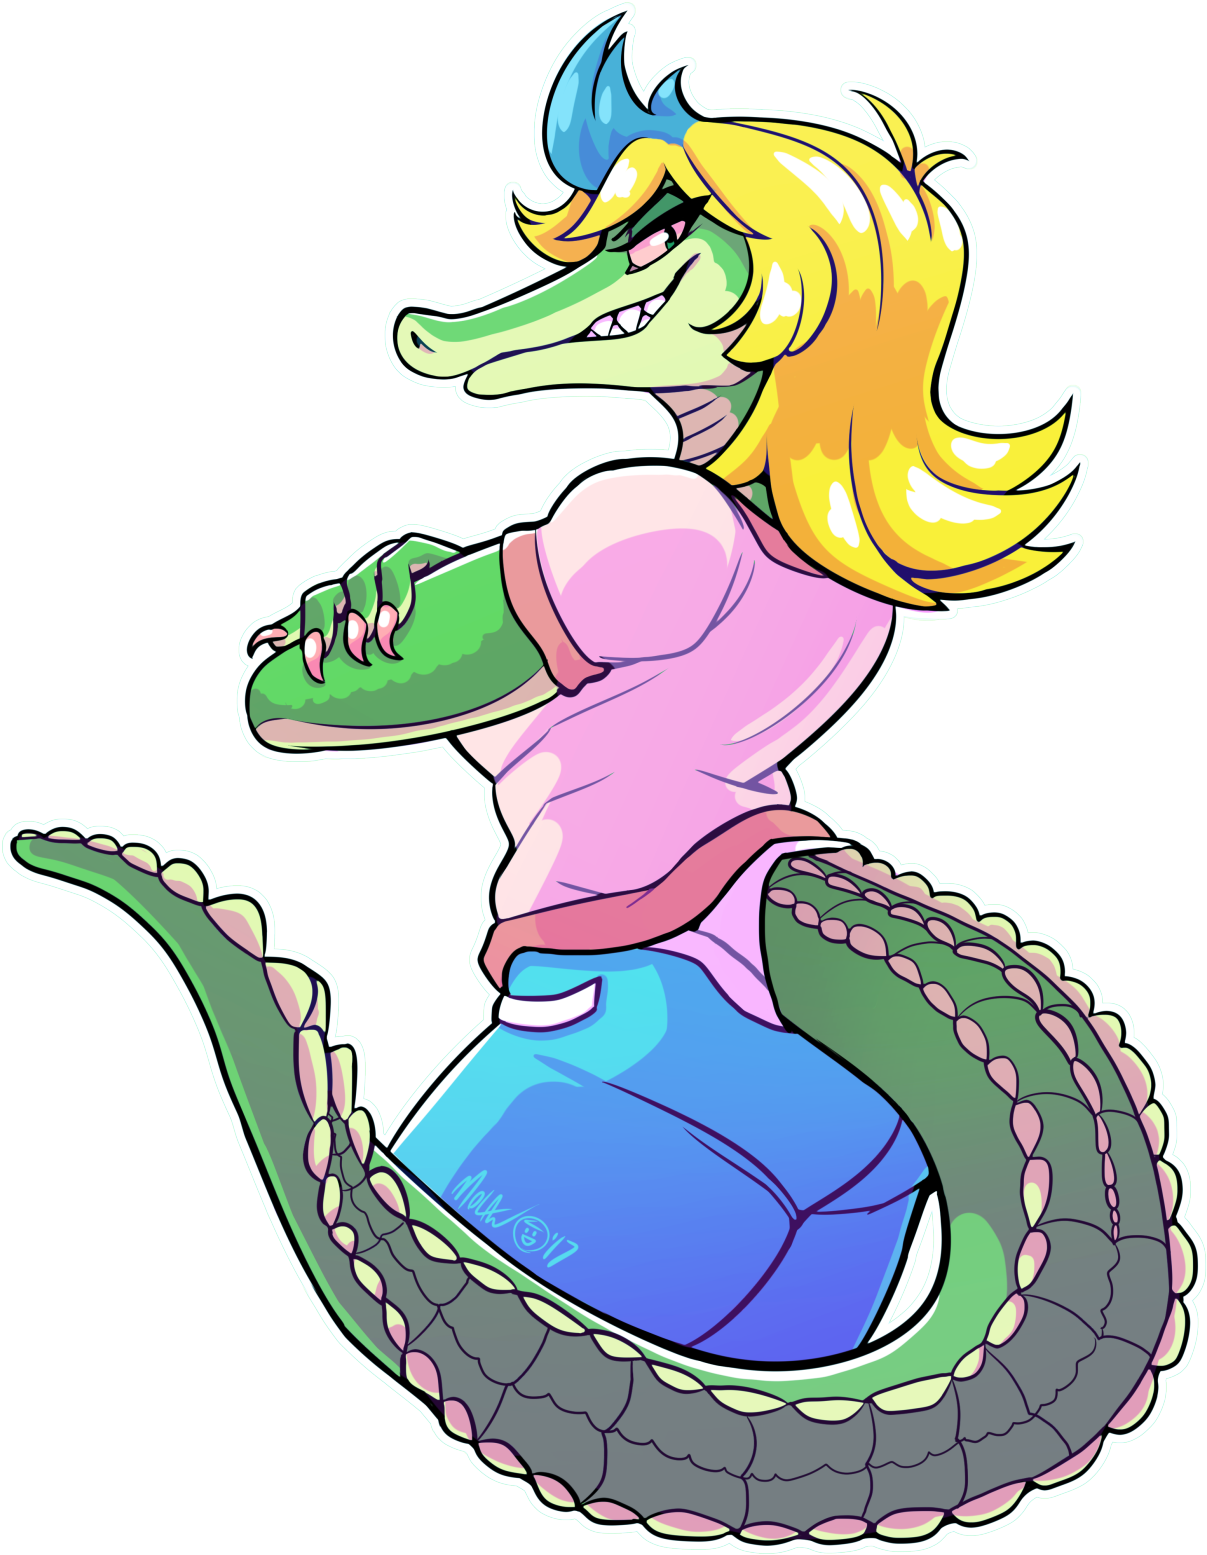 Half Body Commission For @brainal Leakage Featuring - Reptile Furry Art (1280x1649)